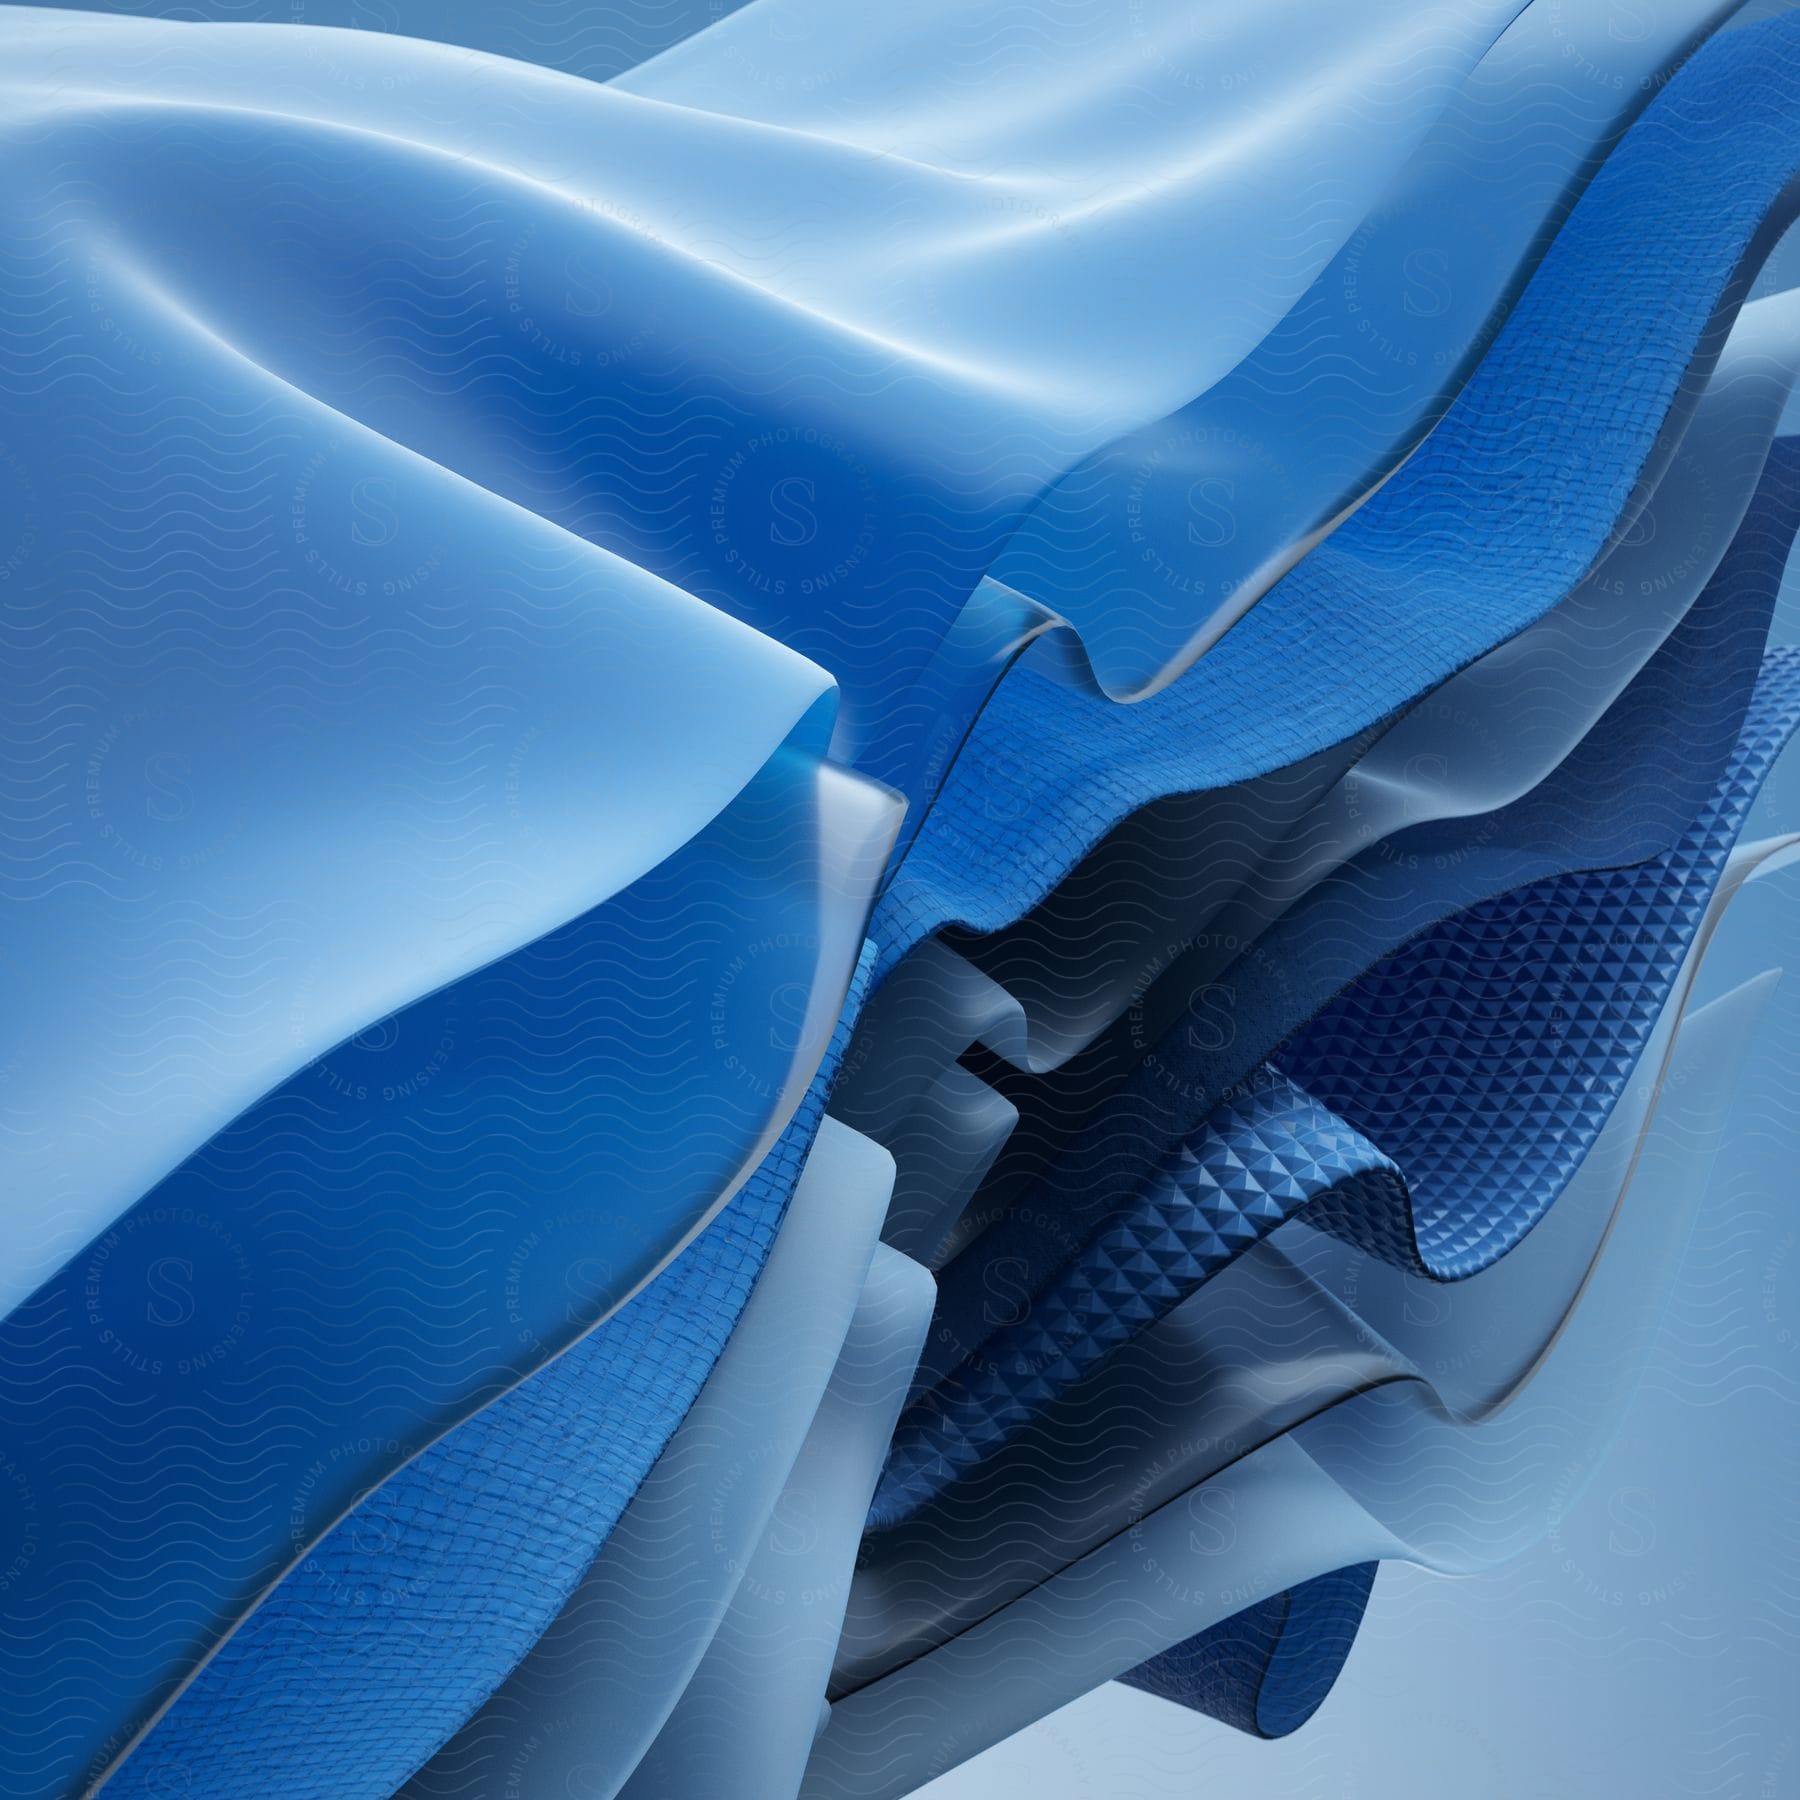 Abstract and fluid meshes, predominantly in various shades of blue, creating a sensation of movement and fluidity.